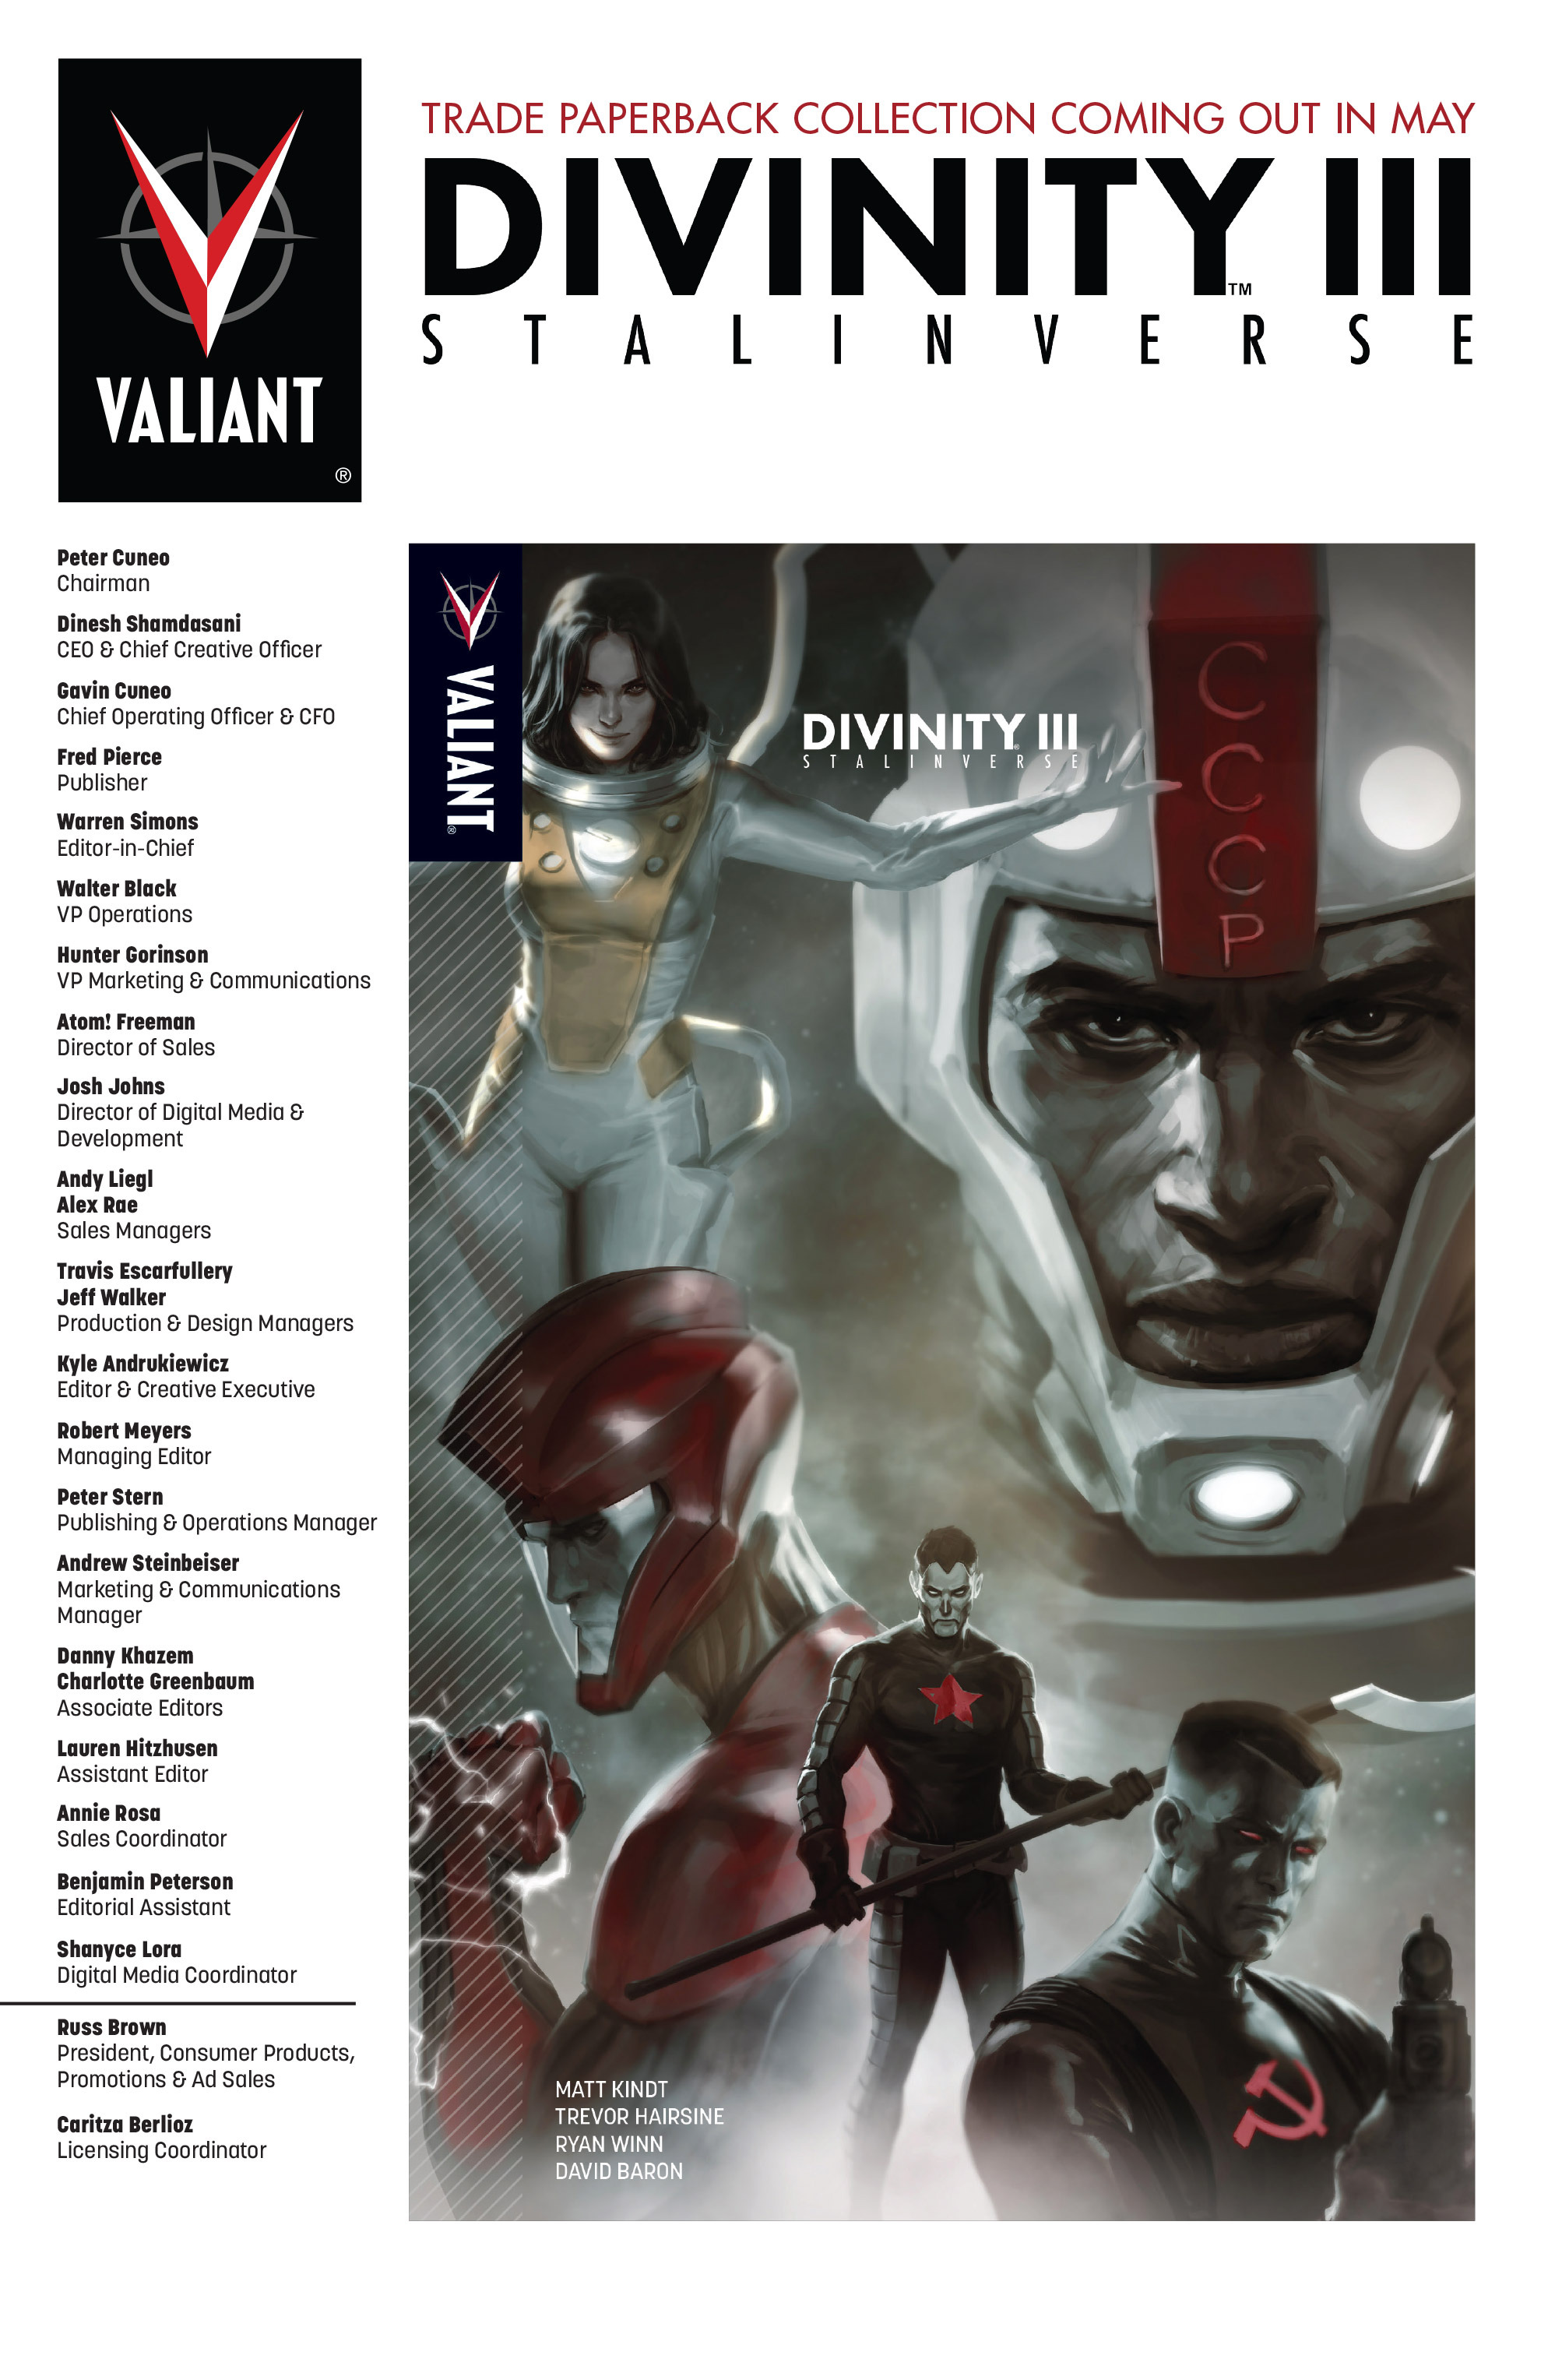 Read online Divinity III: Stalinverse comic -  Issue #4 - 32